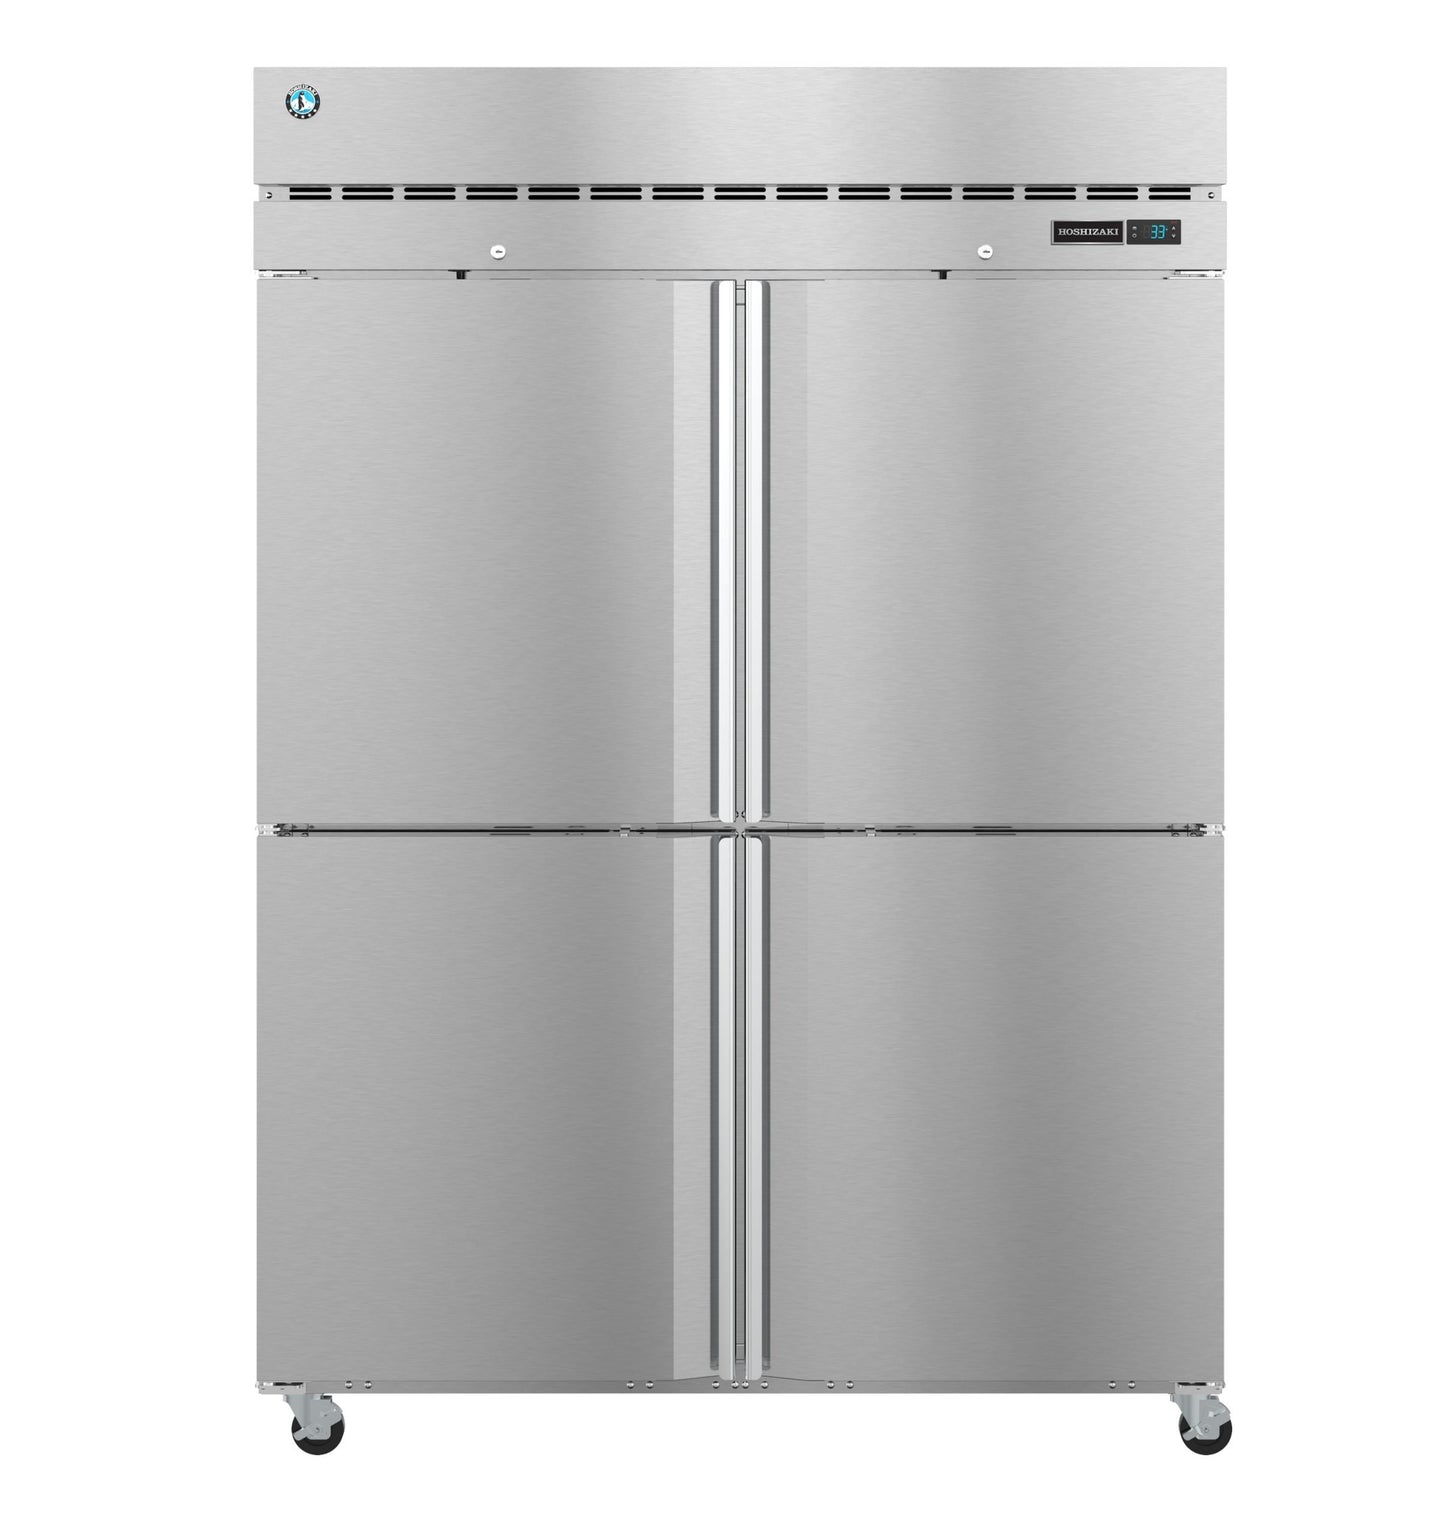 F2A-HS, Freezer, Two Section Upright, Half Stainless Doors with Lock